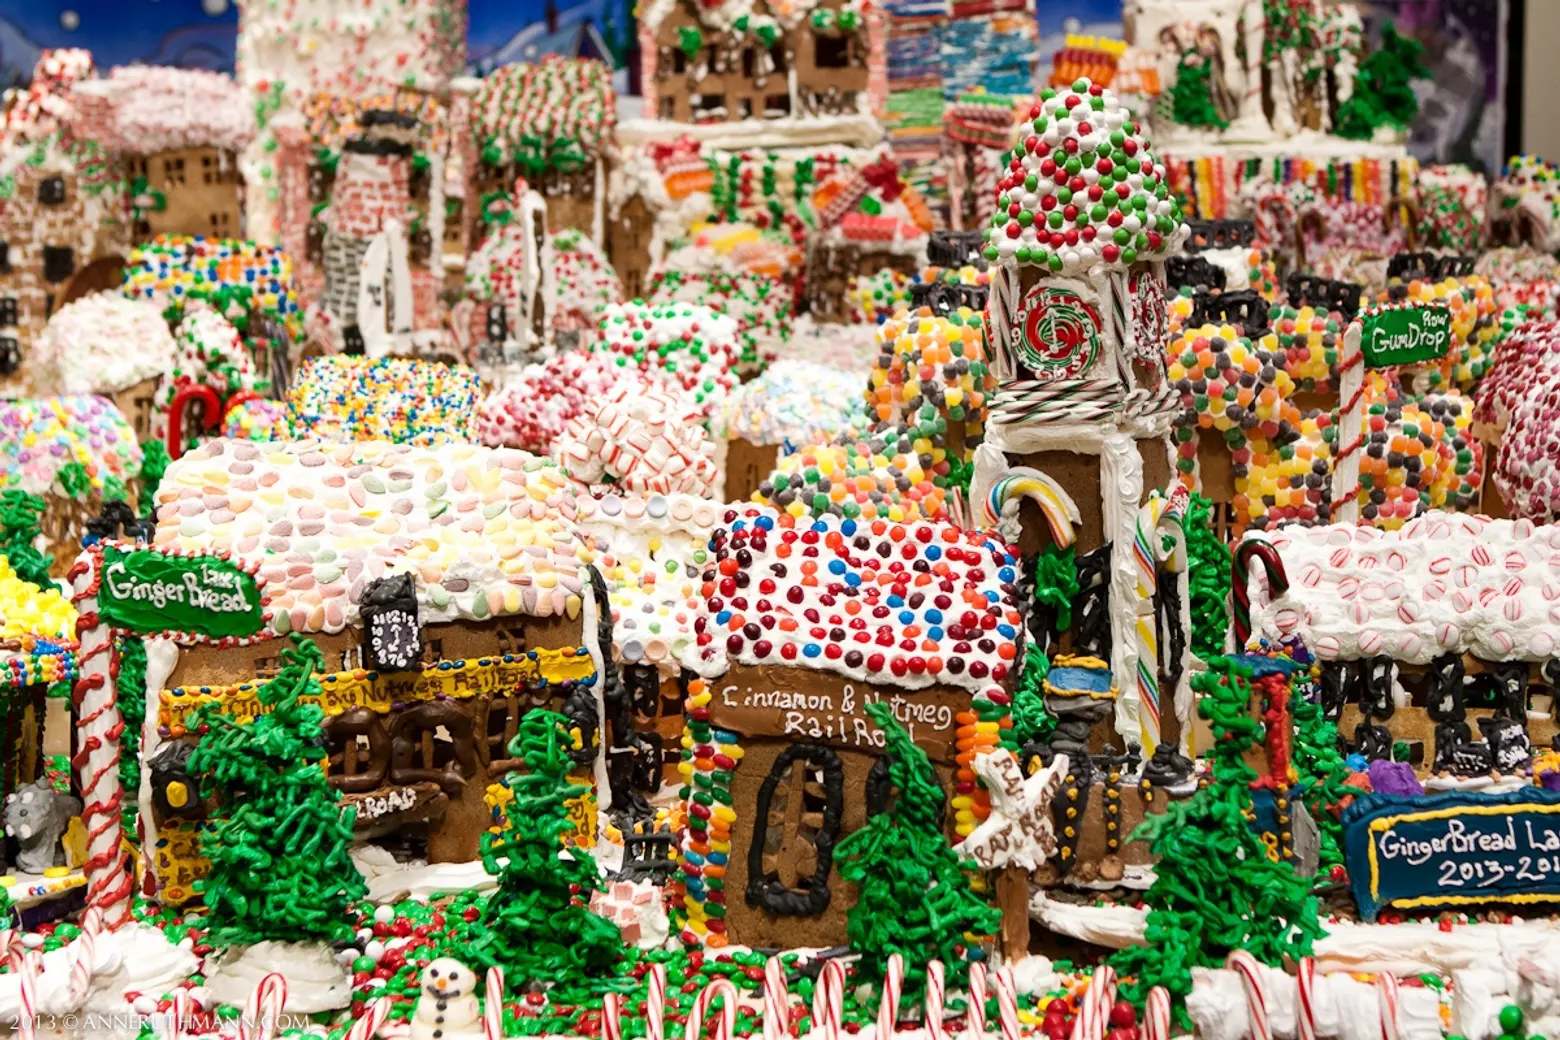 At the New York Hall of Science, the world’s largest gingerbread village gets even bigger